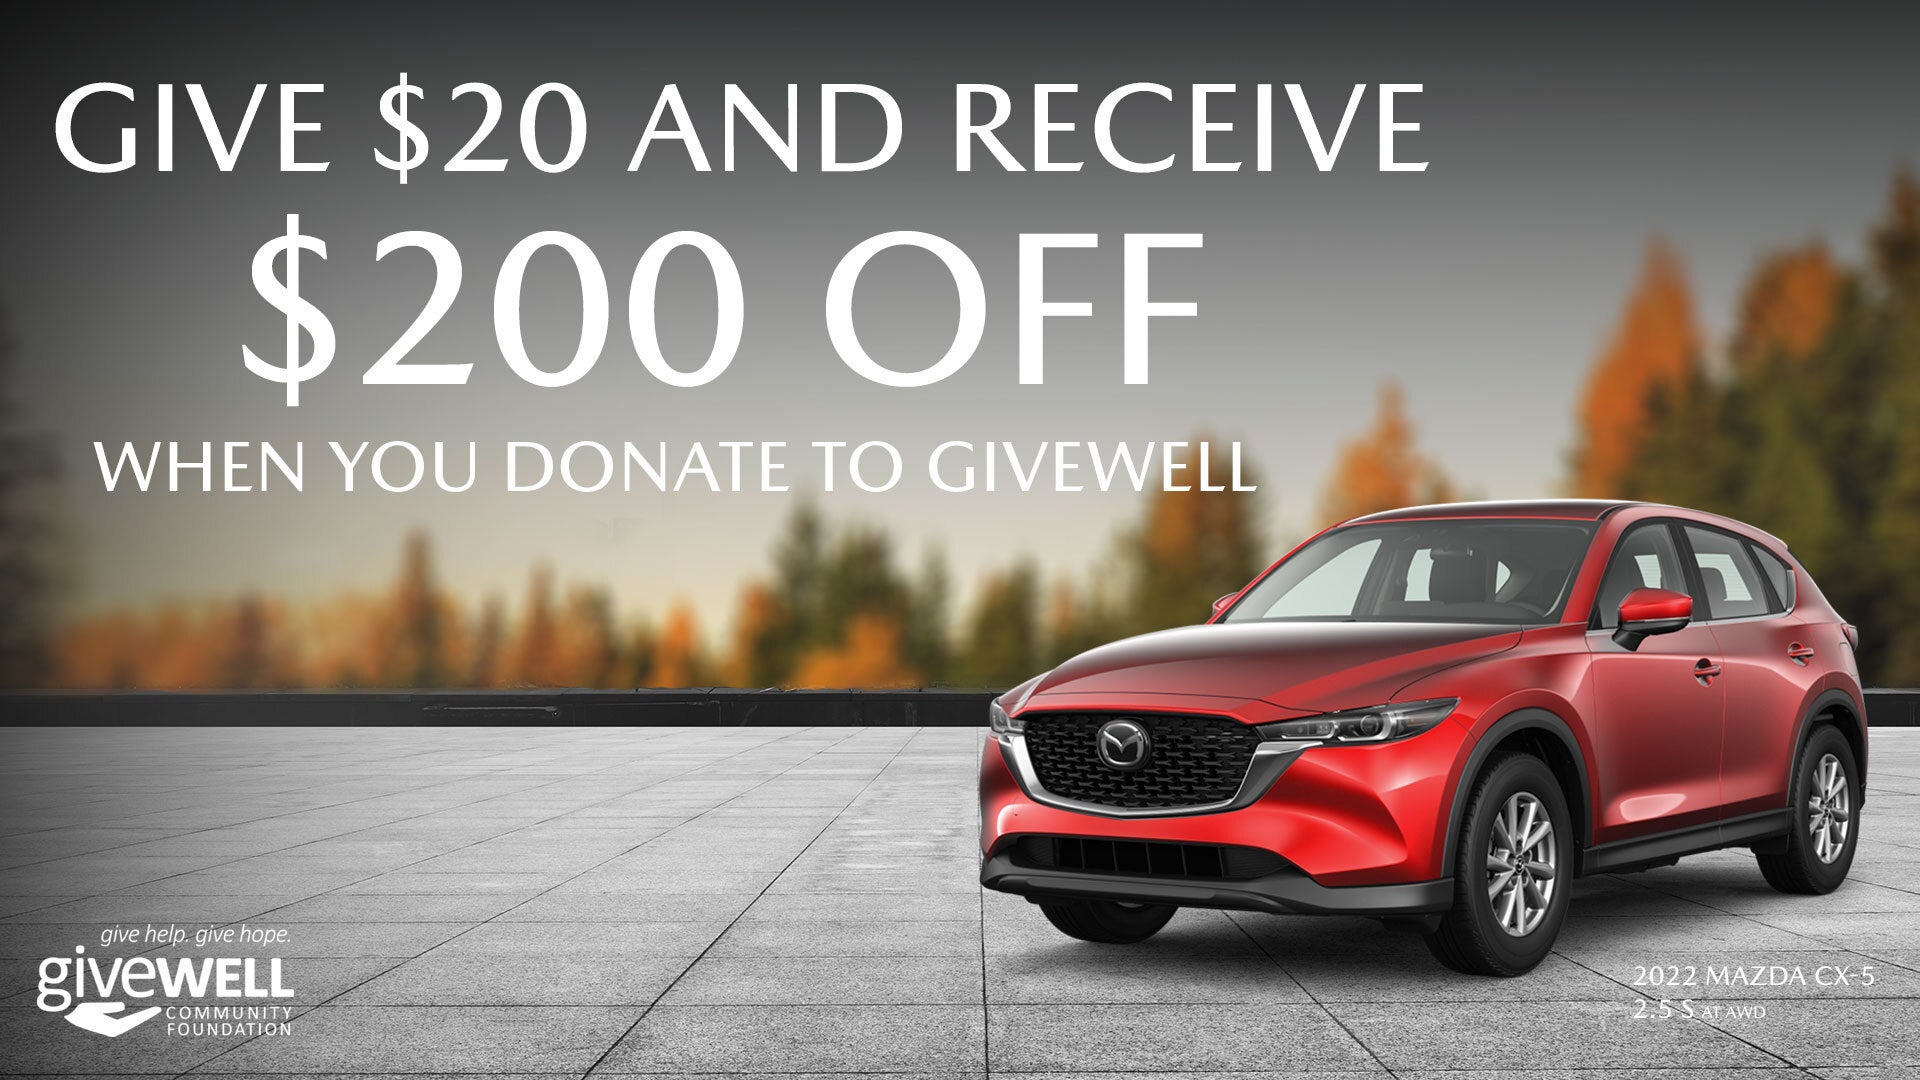 $200 off with donation of $20 or more to GiveWell Community Foundation